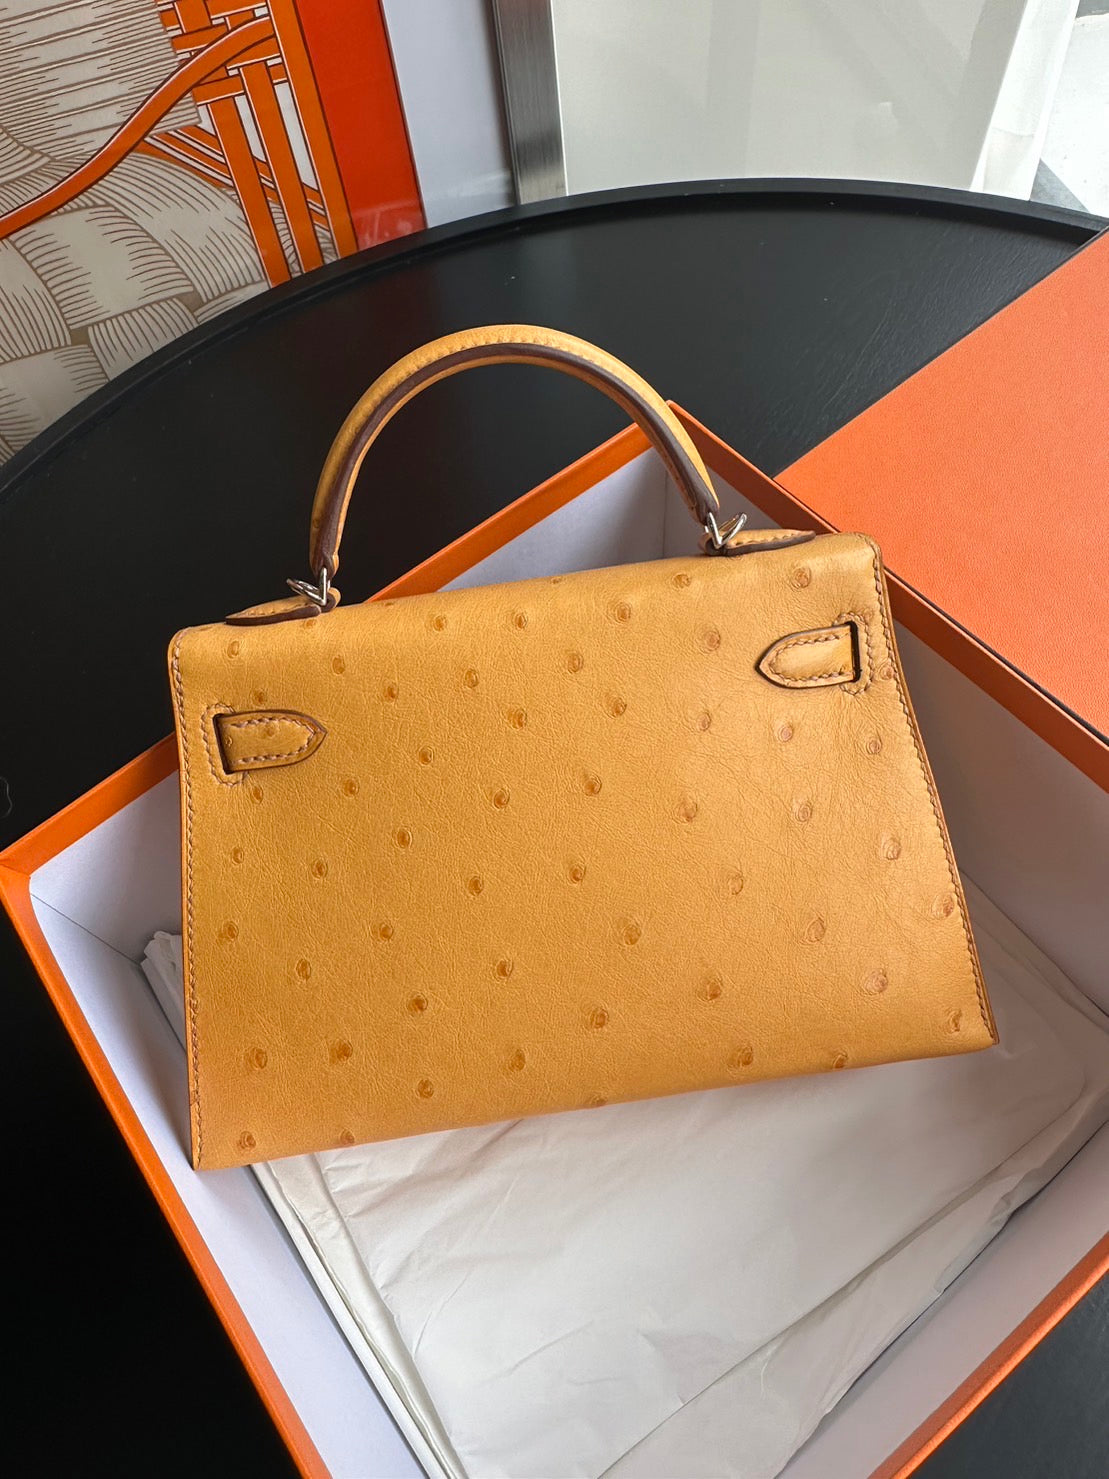 SOLD OUT——— Hermes Kelly A Dos PM in ostrich On website search for